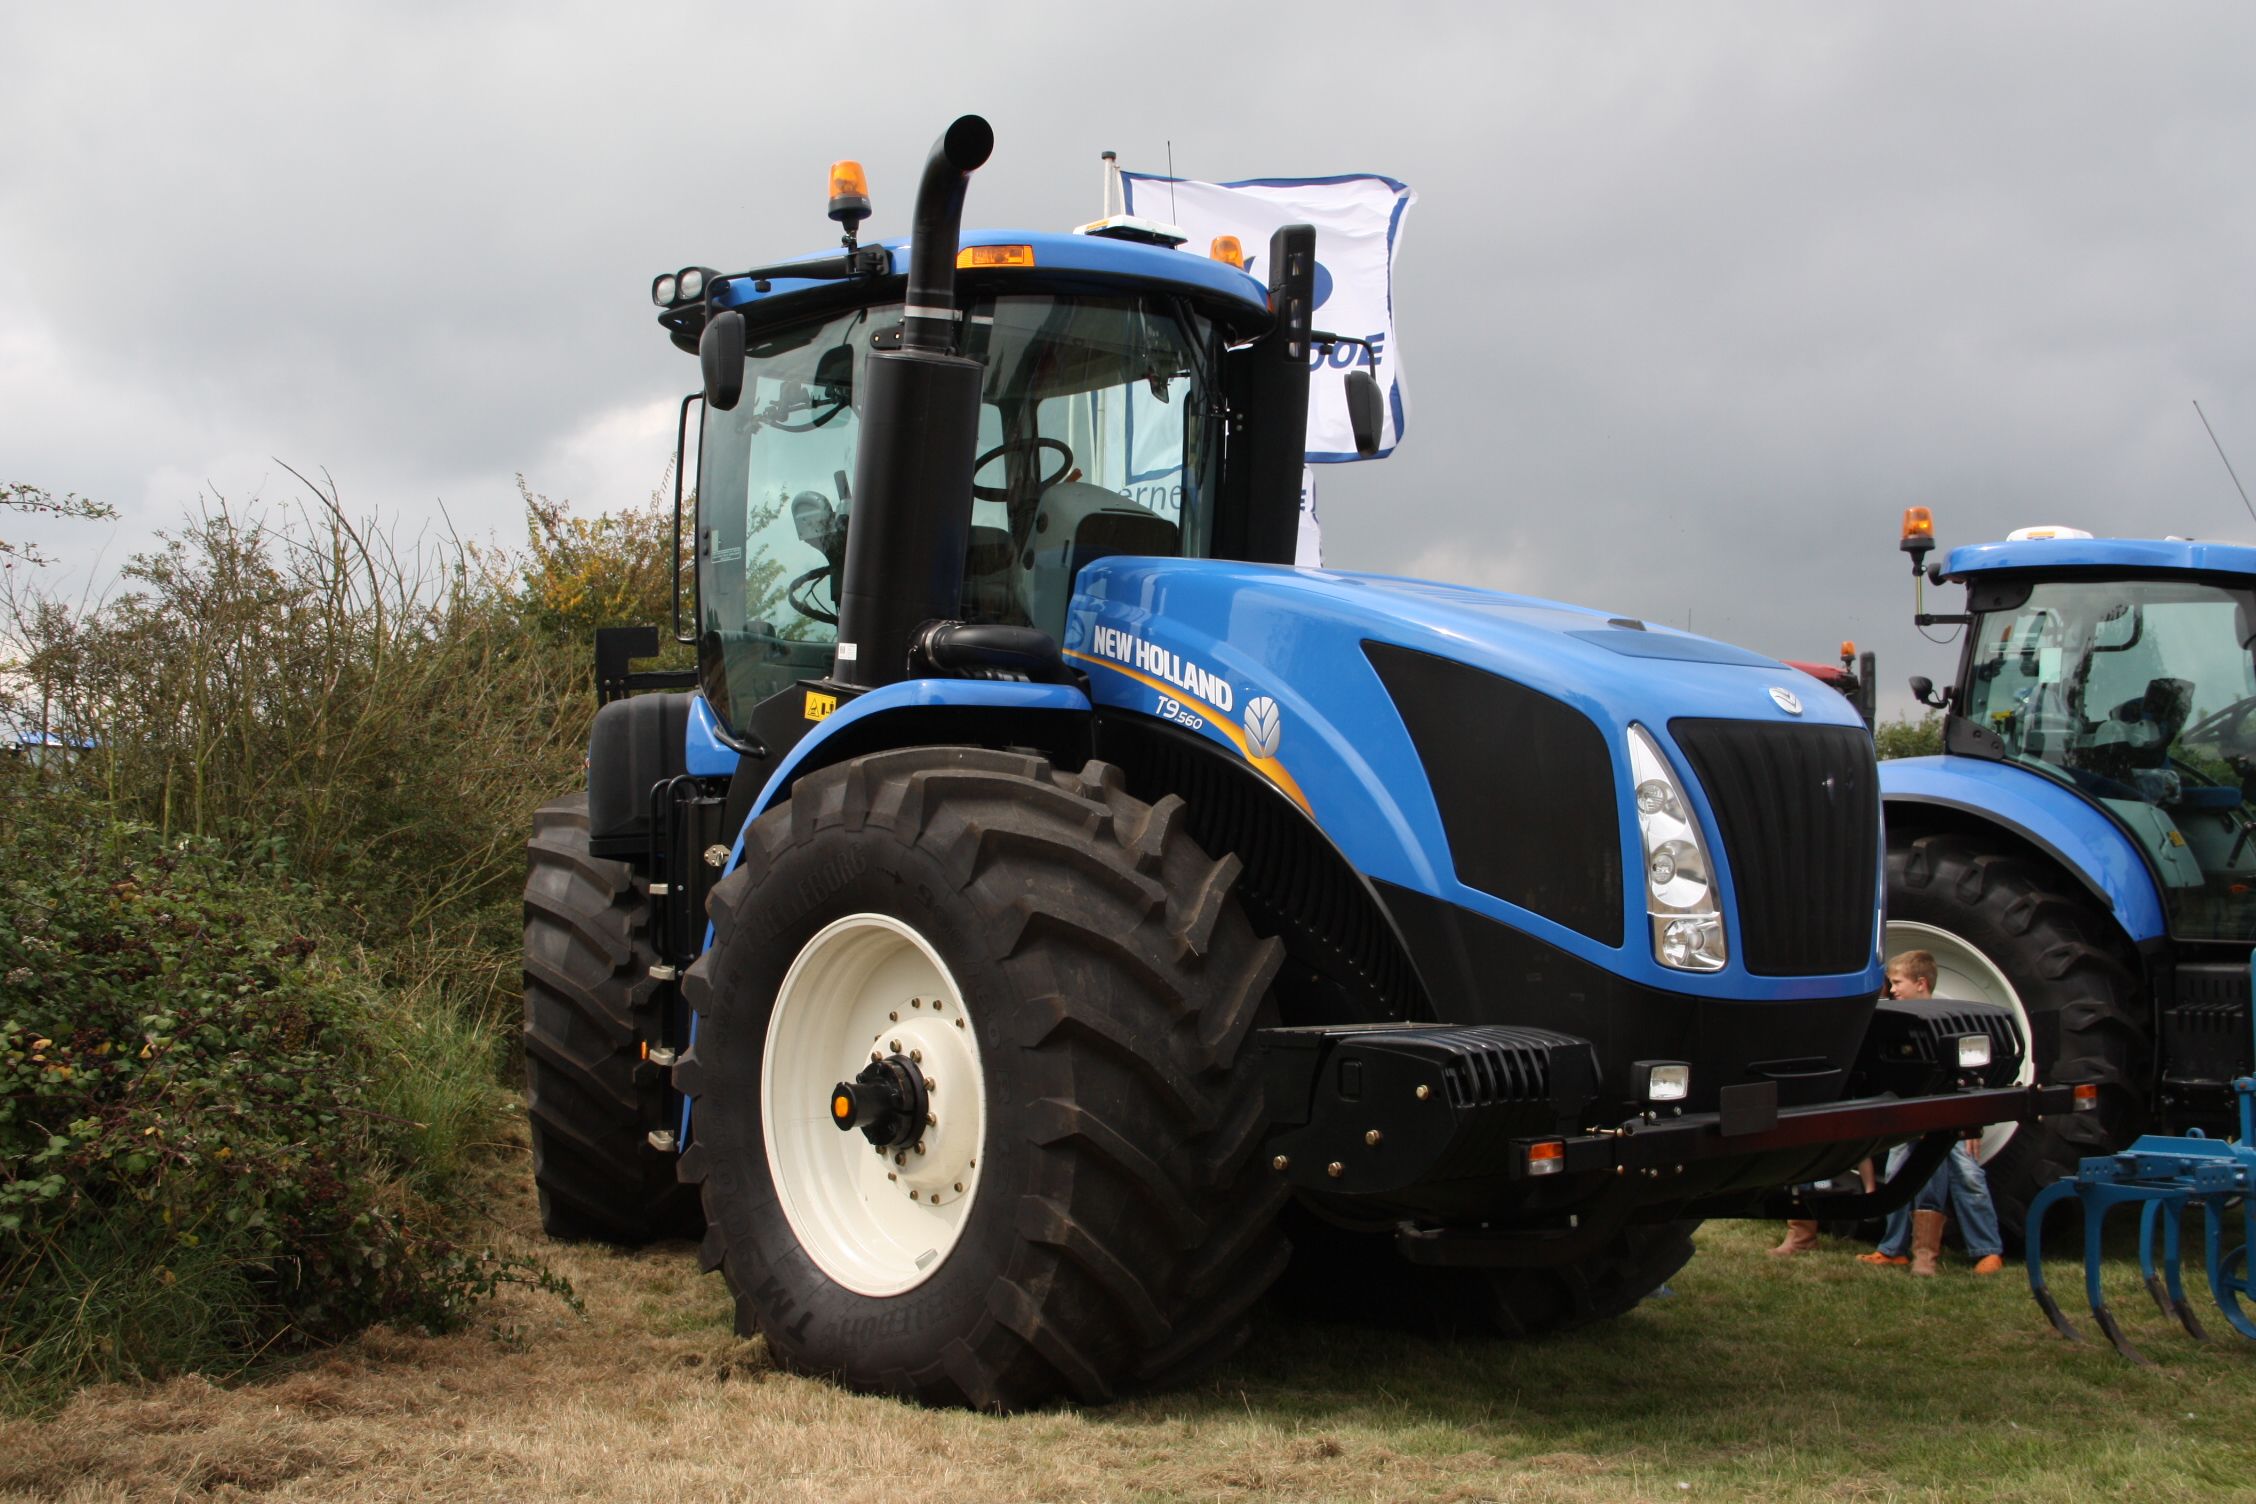 New Holland Tractor wallpaper, Vehicles, HQ New Holland Tractor pictureK Wallpaper 2019